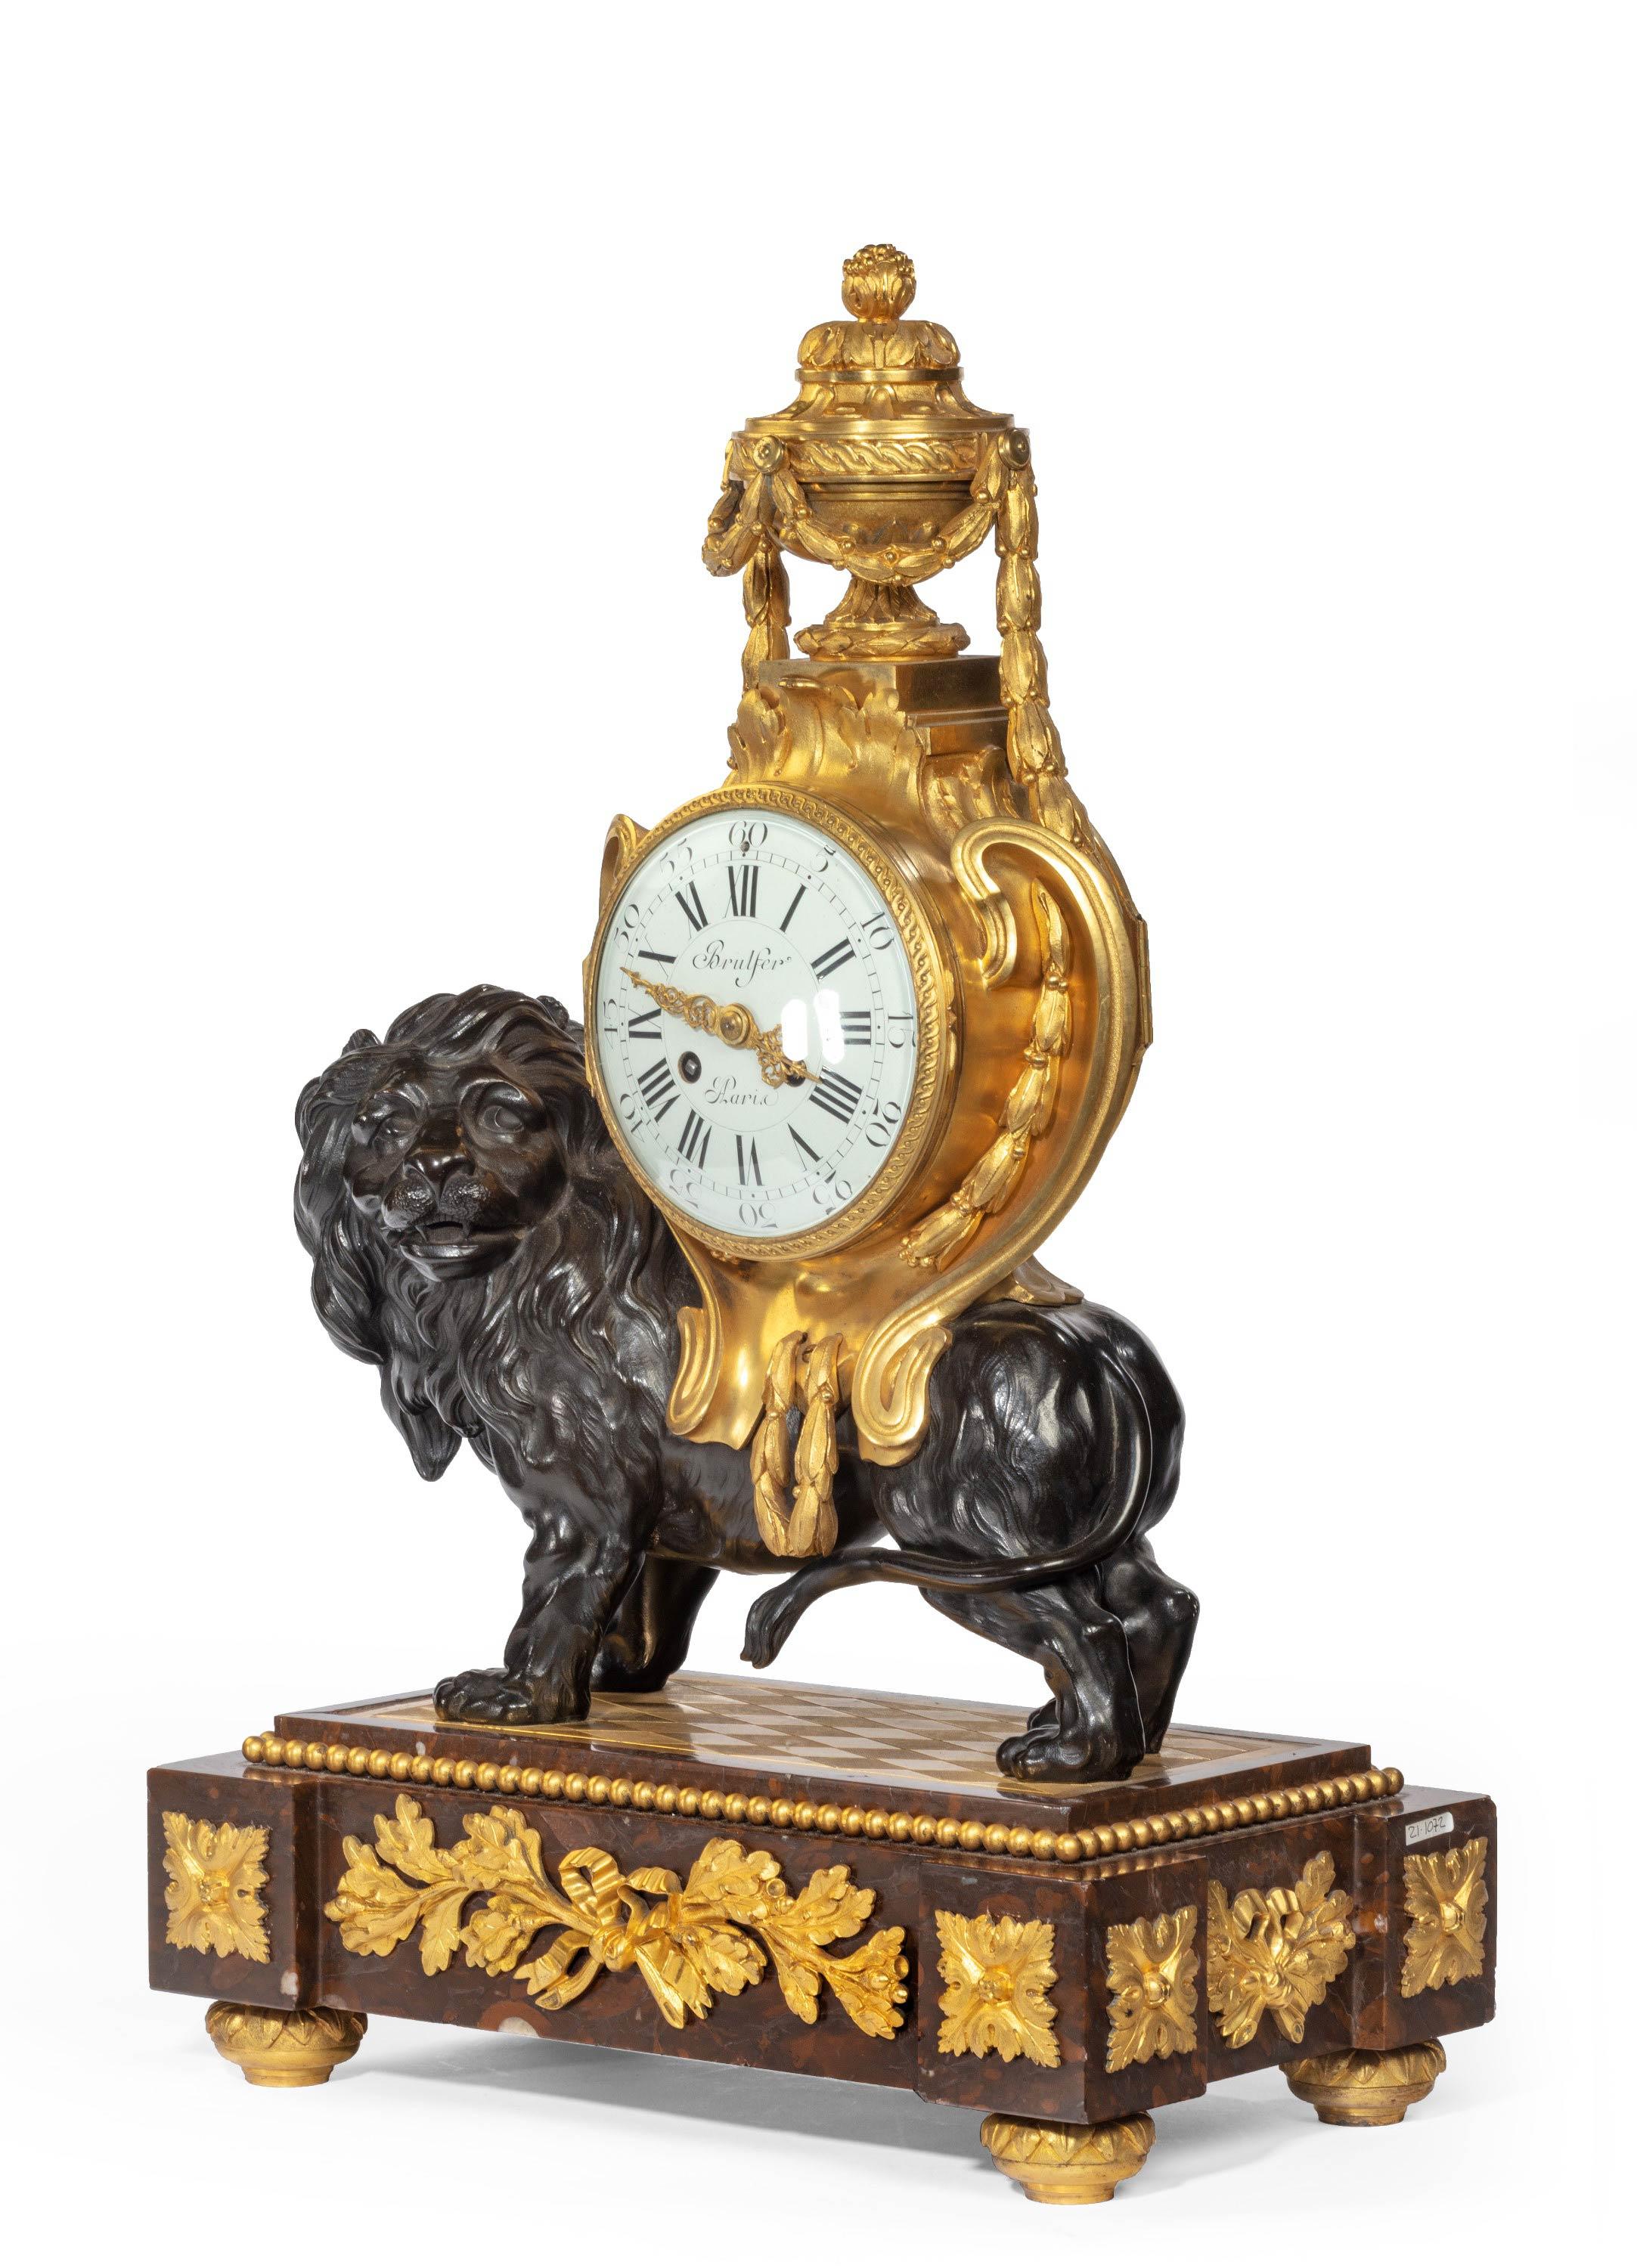 French Napoleon III Period Gilt Bronze Mantel Clock by Brulfer of Paris